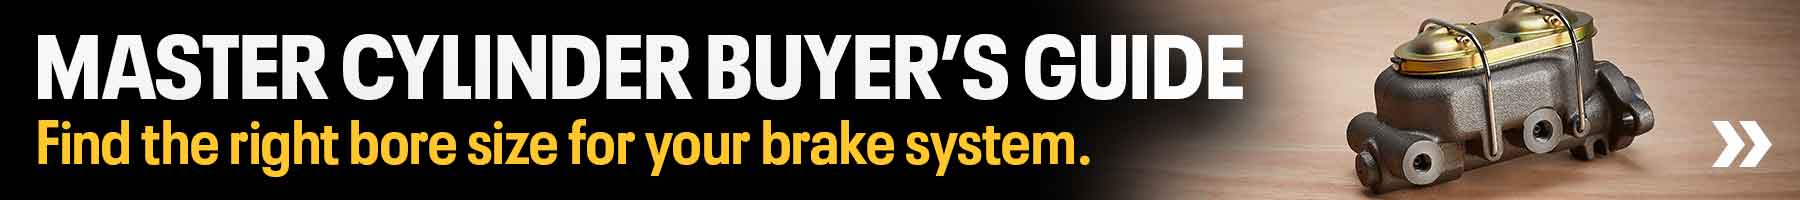 Master Cylinder Buyer's Guide